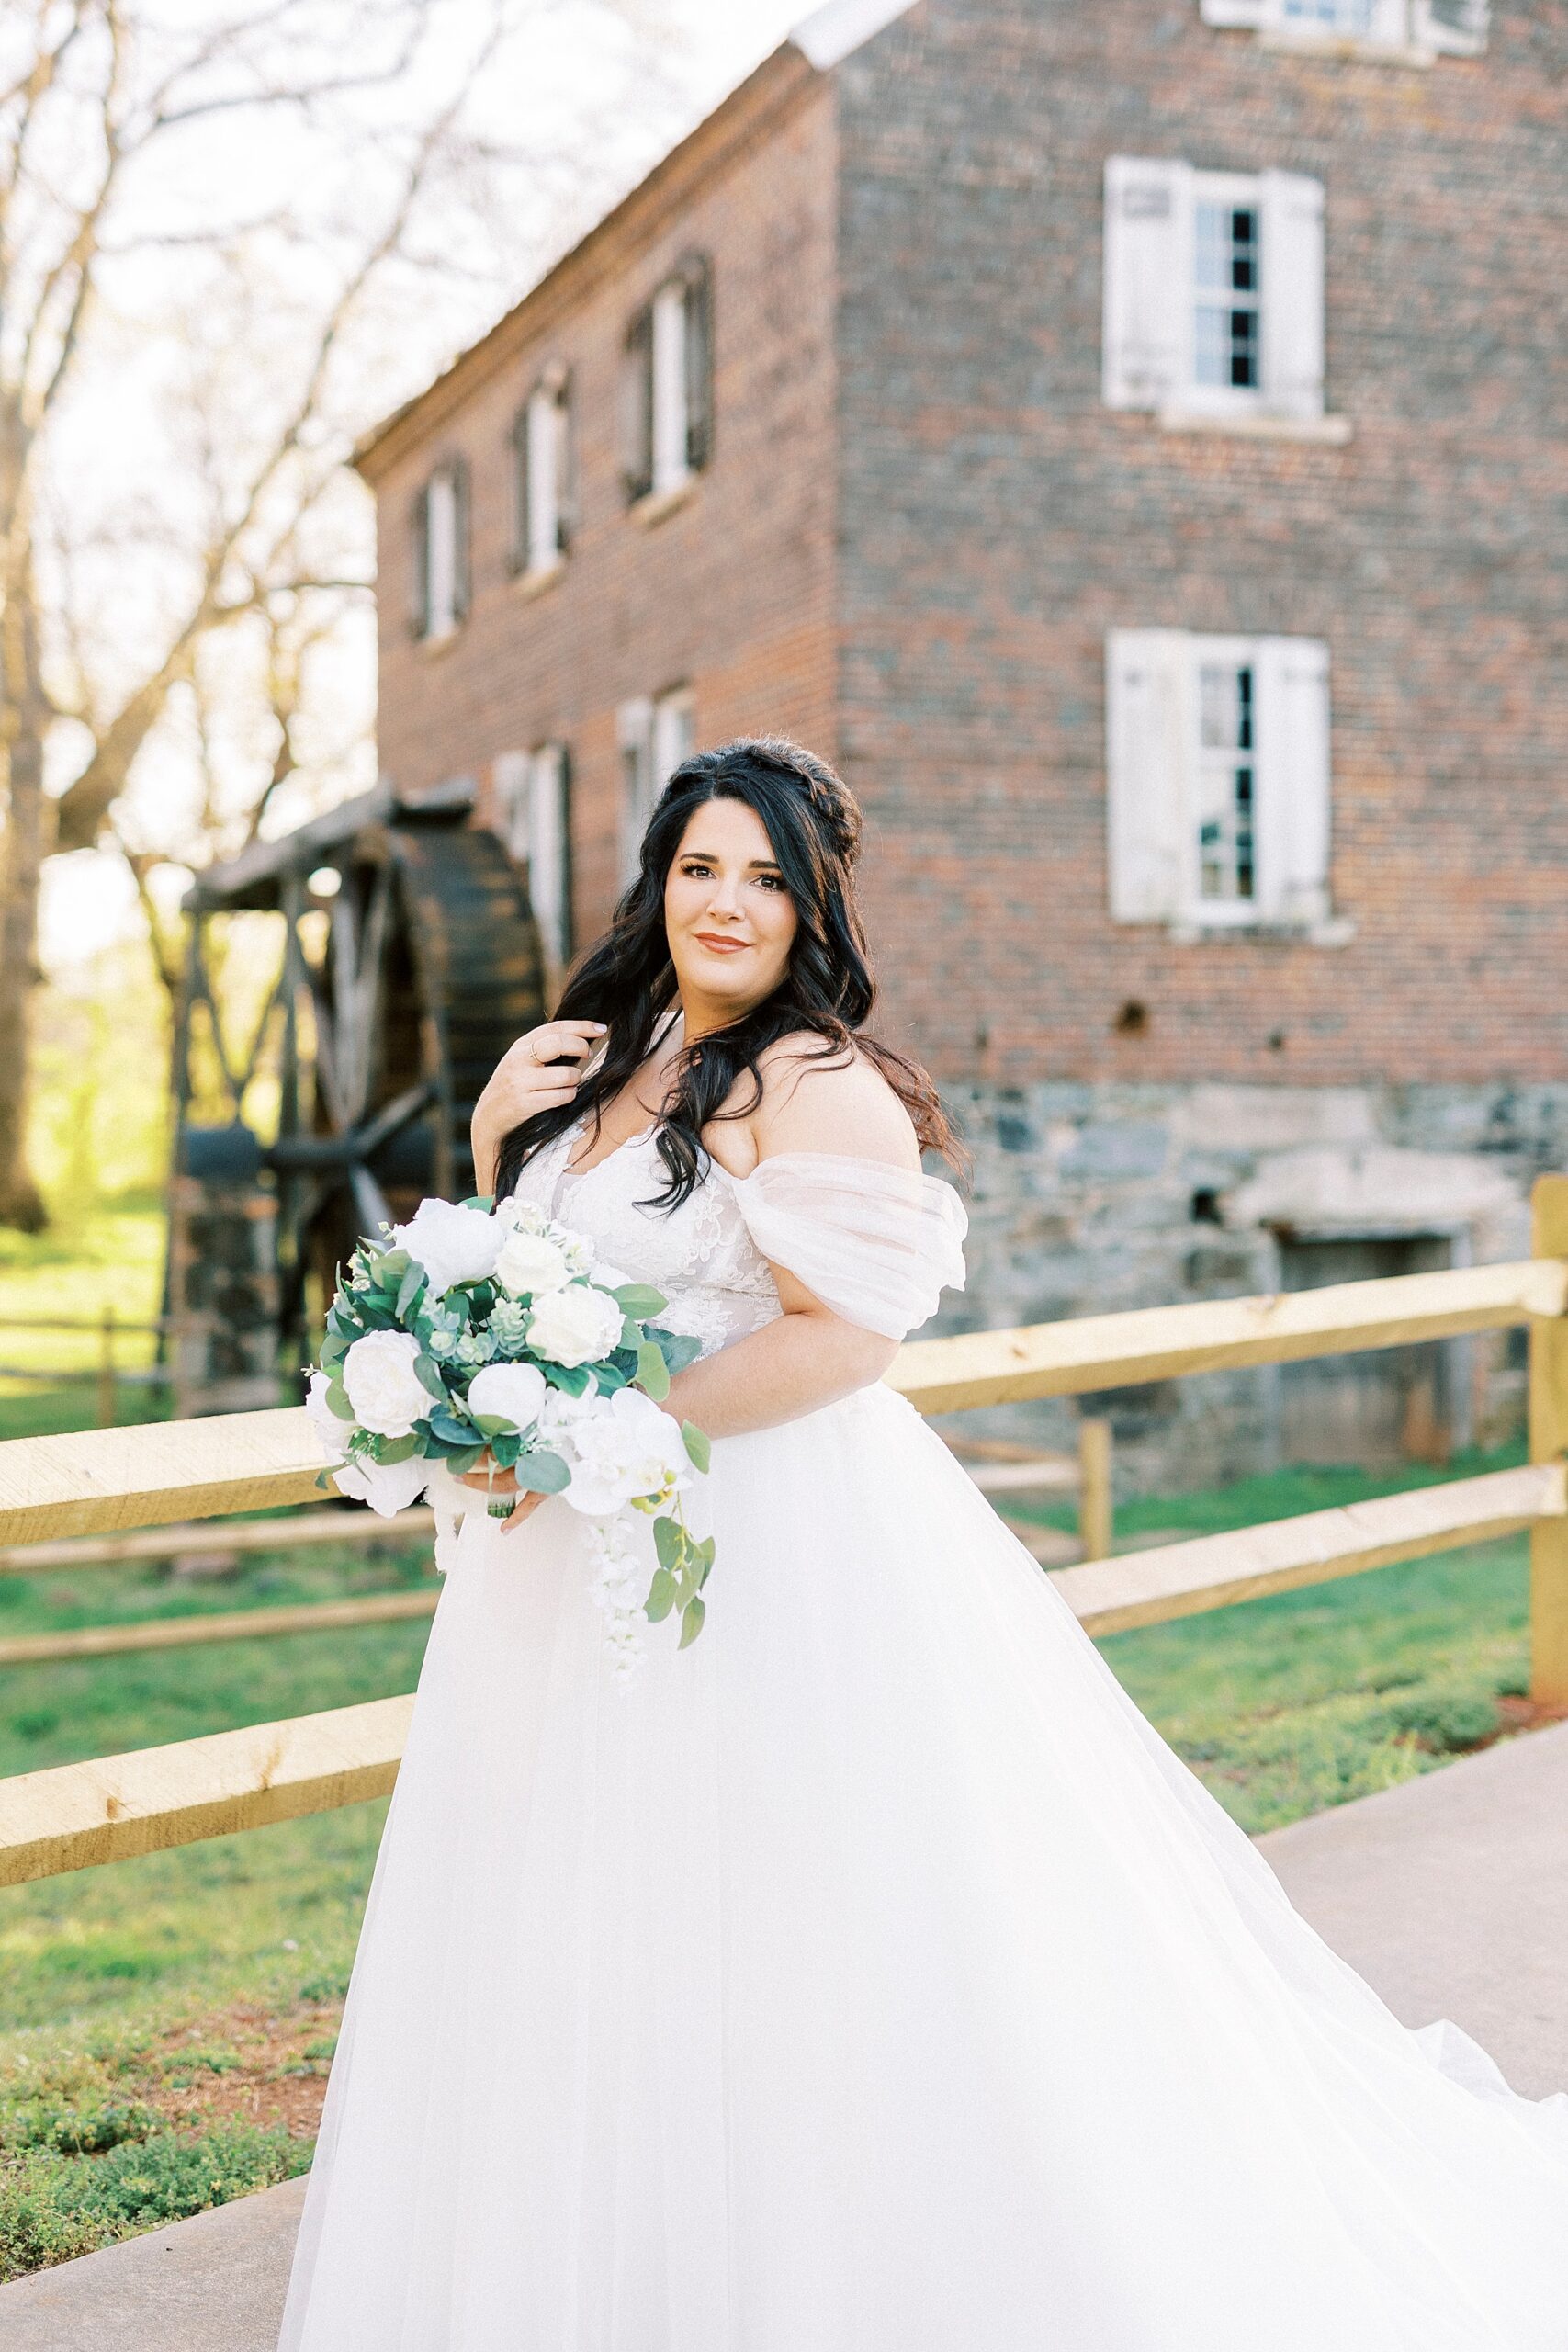 brunette bride holds bouquet of white flowers in front of brick building 